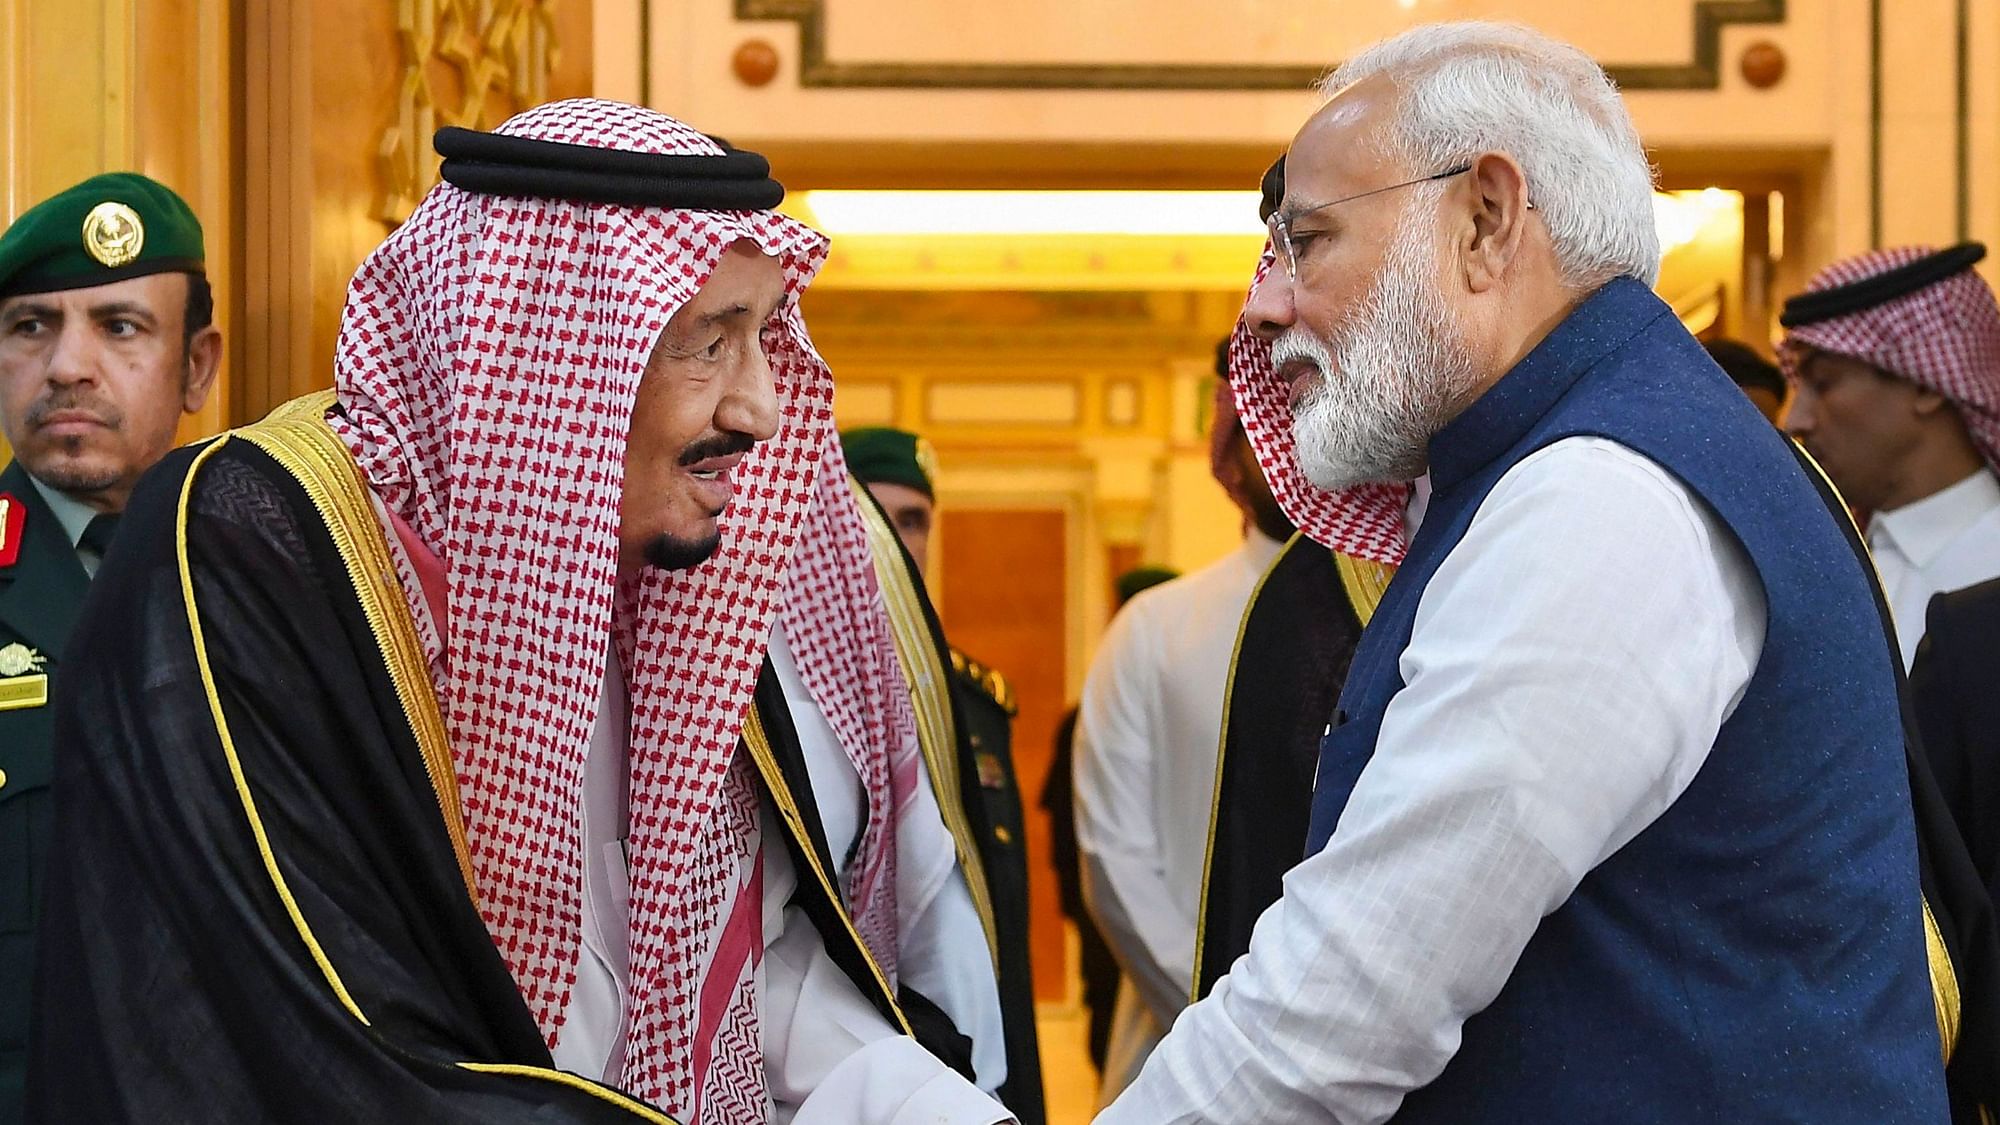 India has, in a statement, expressed protest against the depiction of India’s external territorial boundaries on a Saudi banknote.